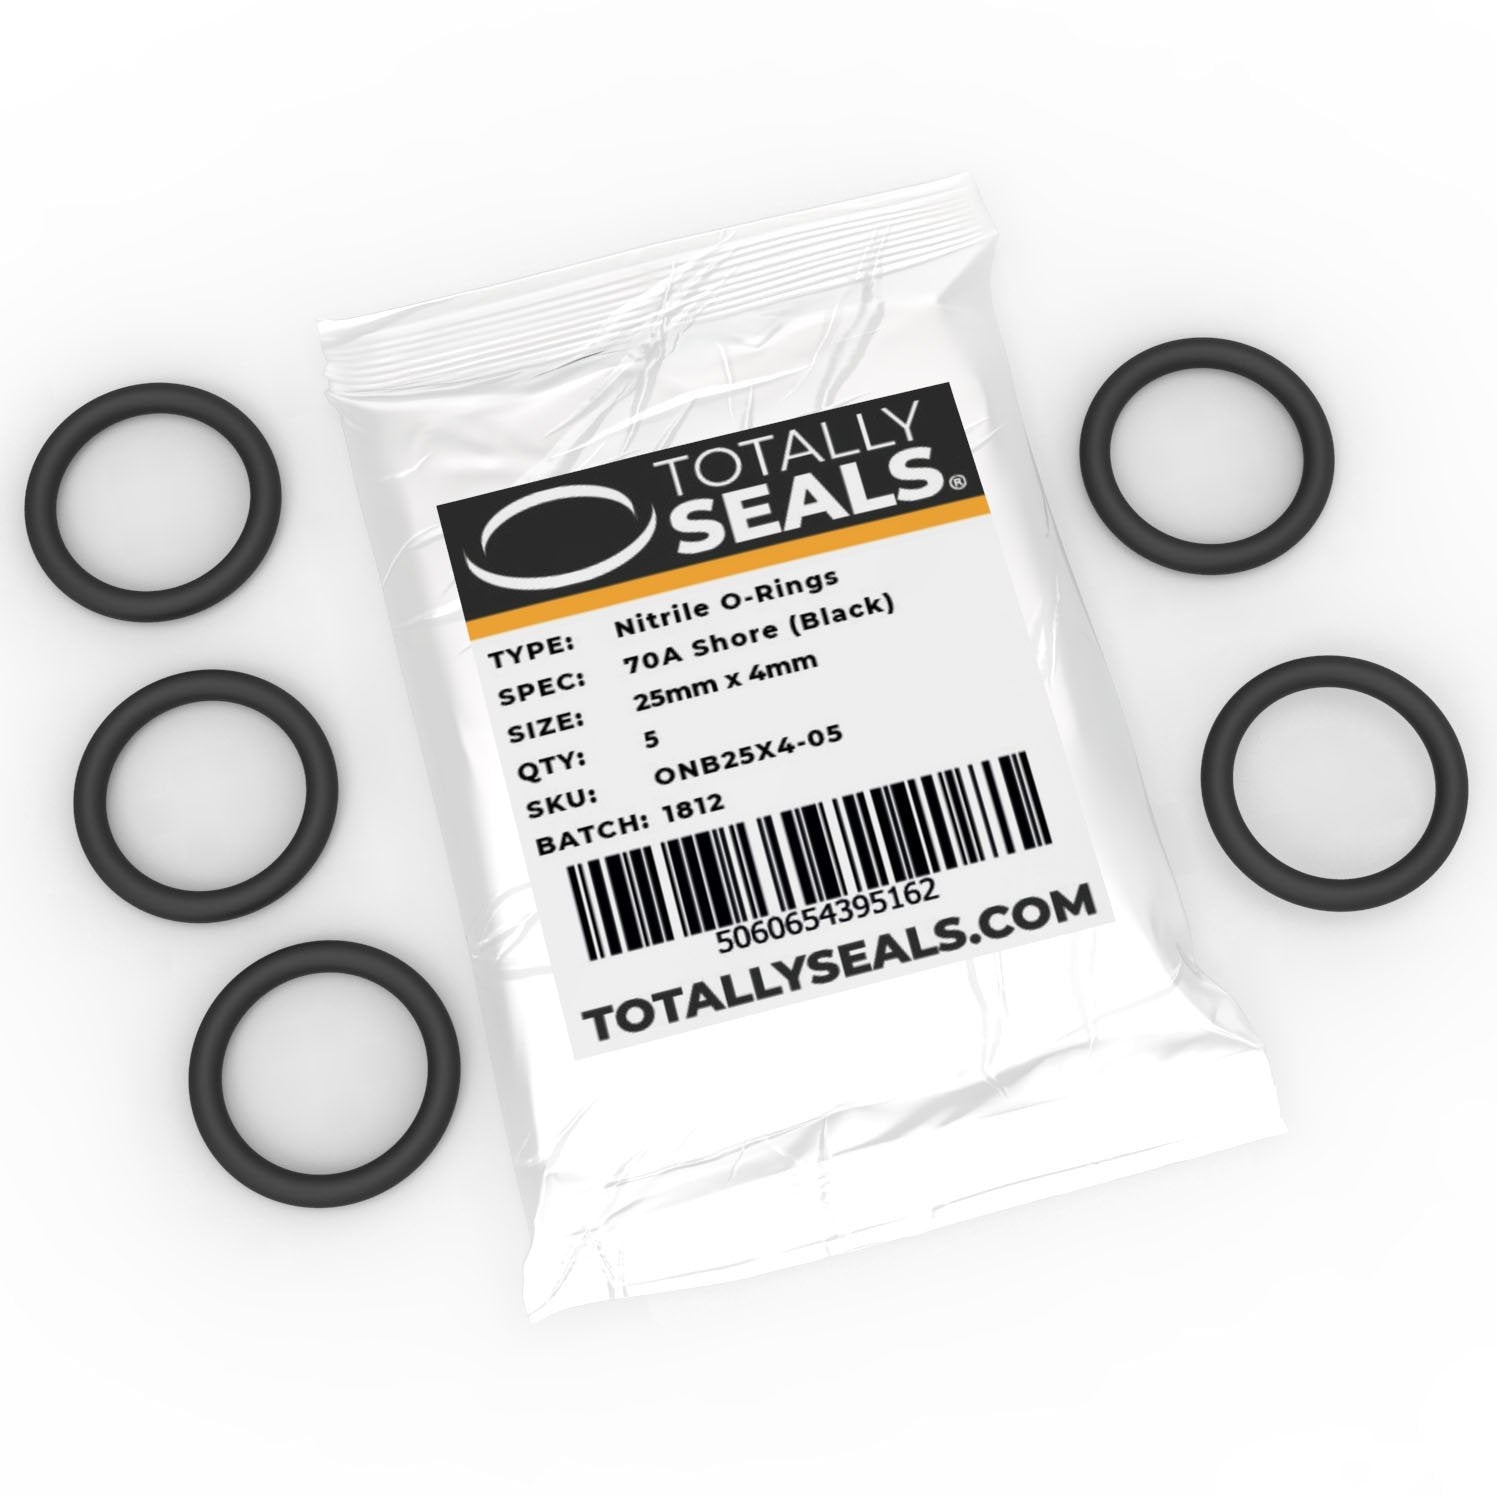 25mm x 4mm (33mm OD) Nitrile O-Rings - Totally Seals®